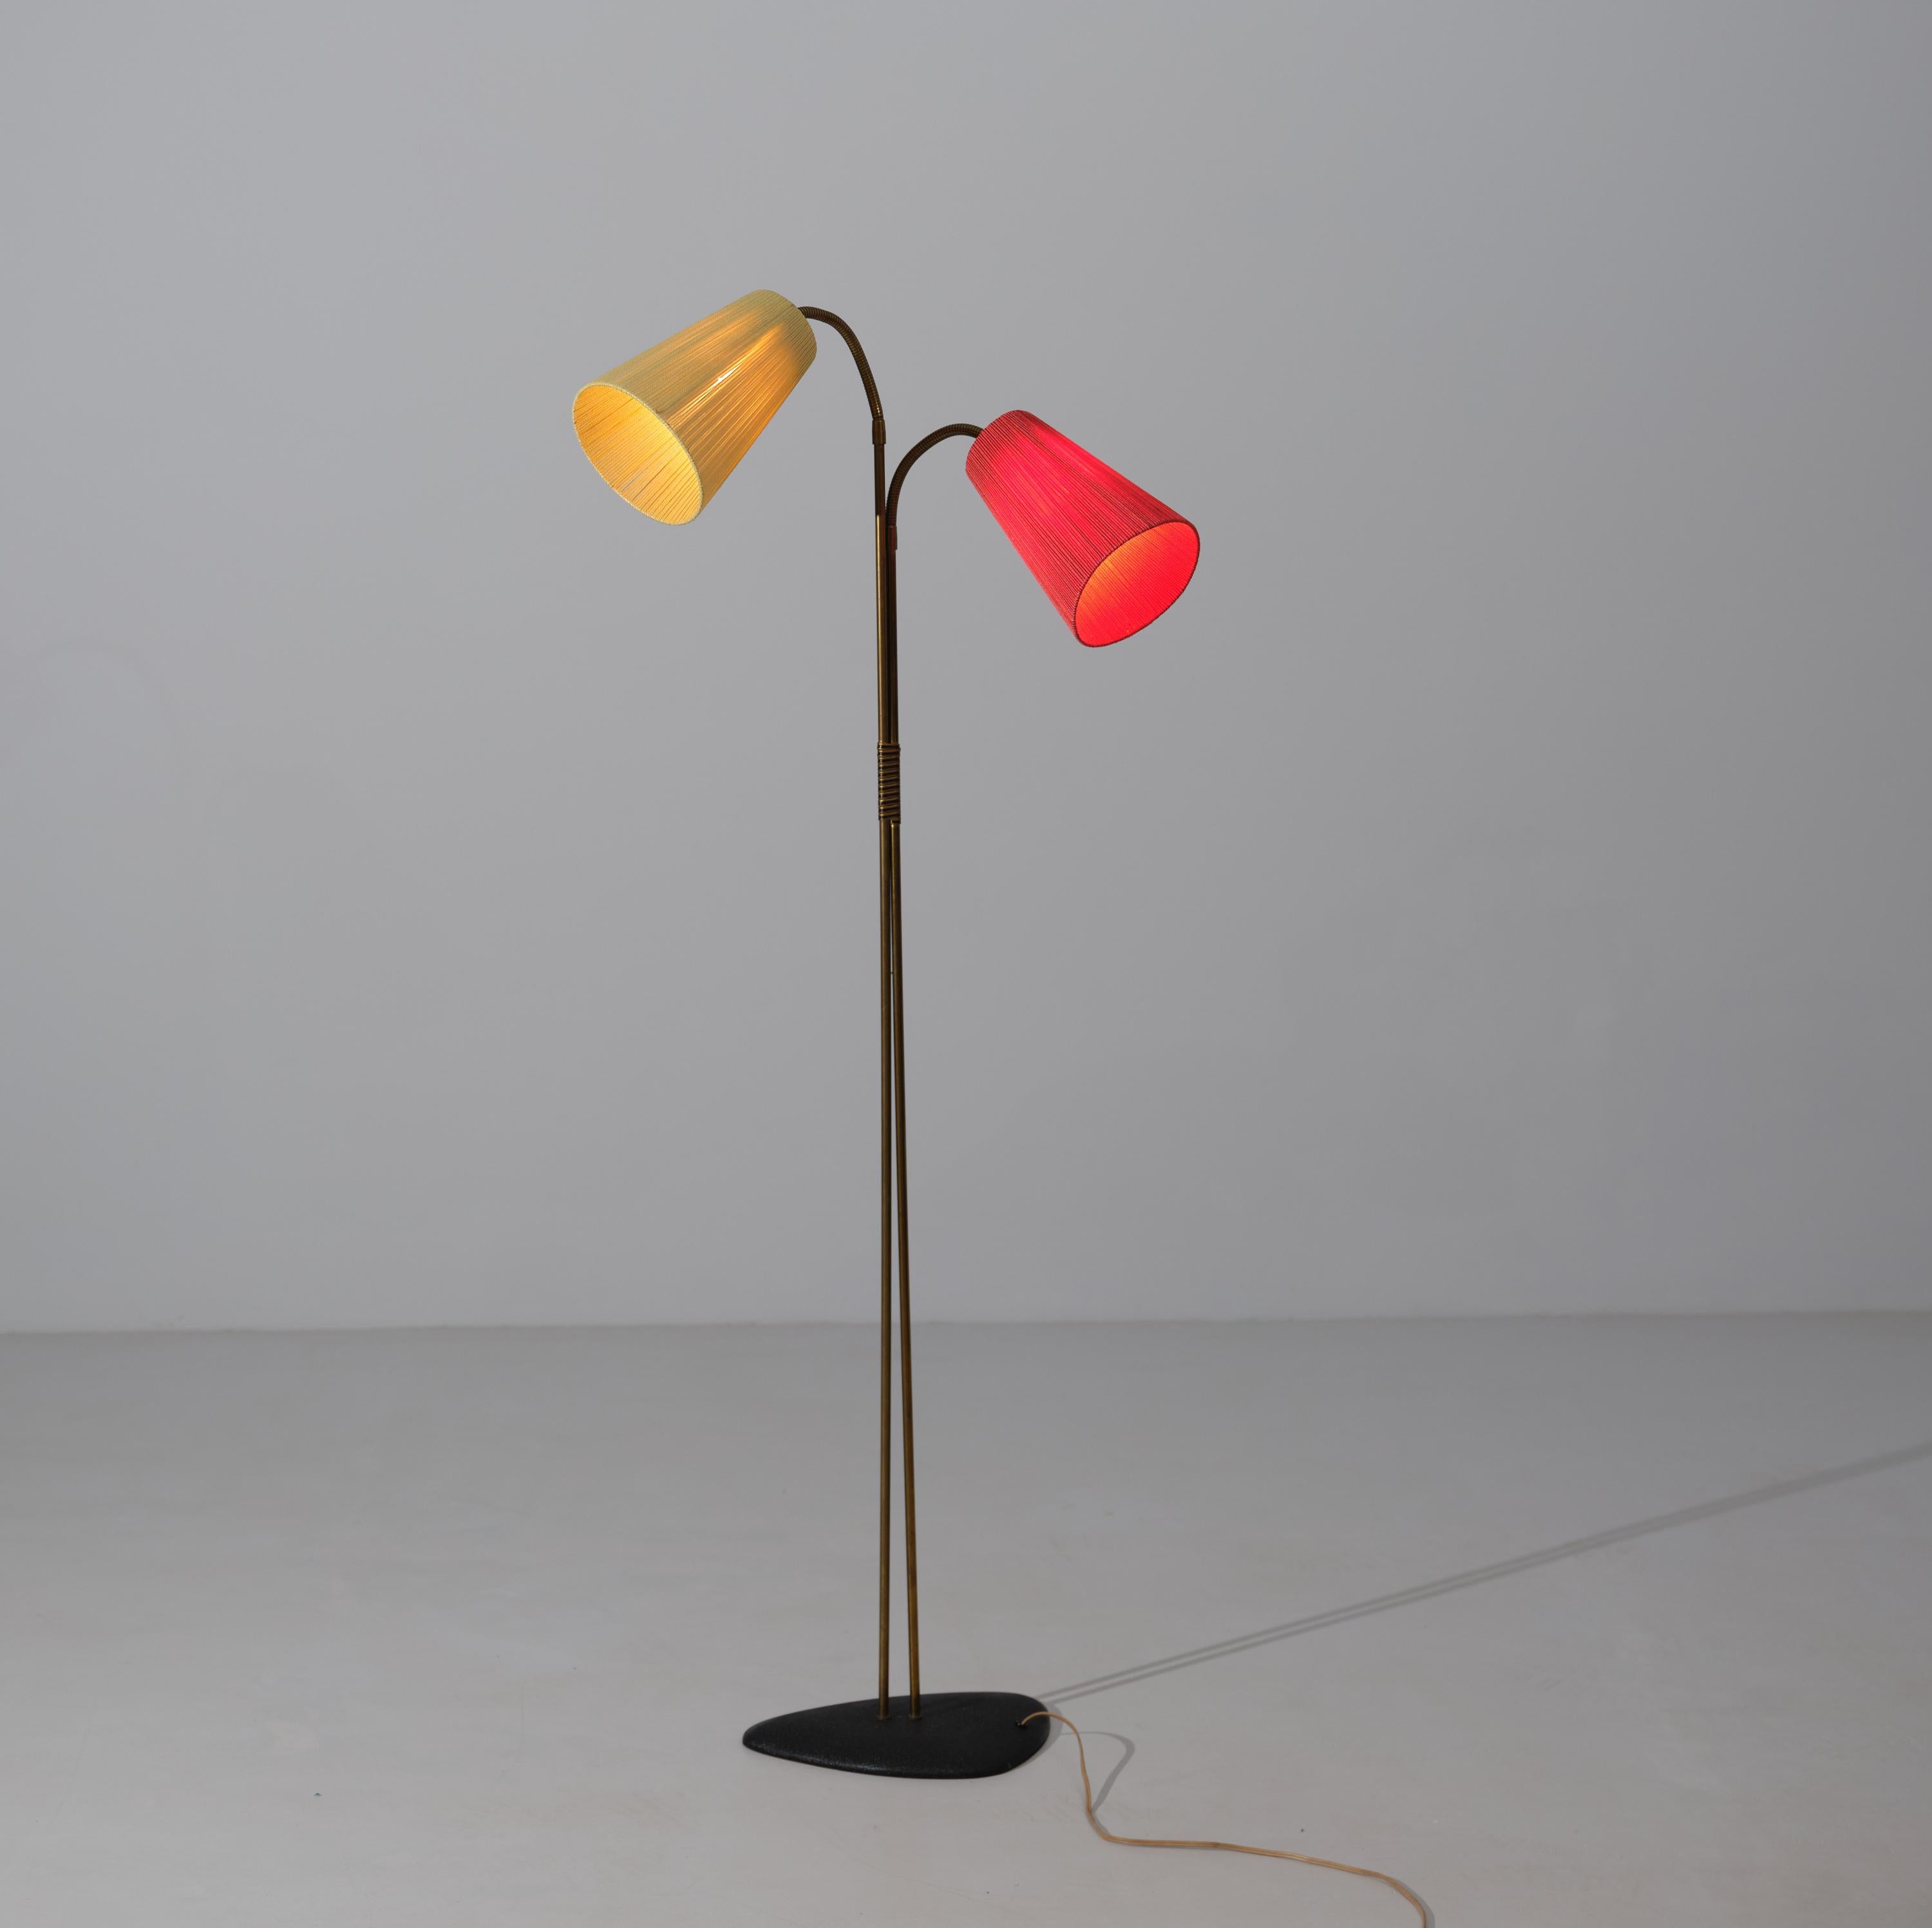 Vintage Mid-Century Modern Floor Lamp: Dual-Light Stand with Colored Diffusers In Good Condition For Sale In Rome, IT